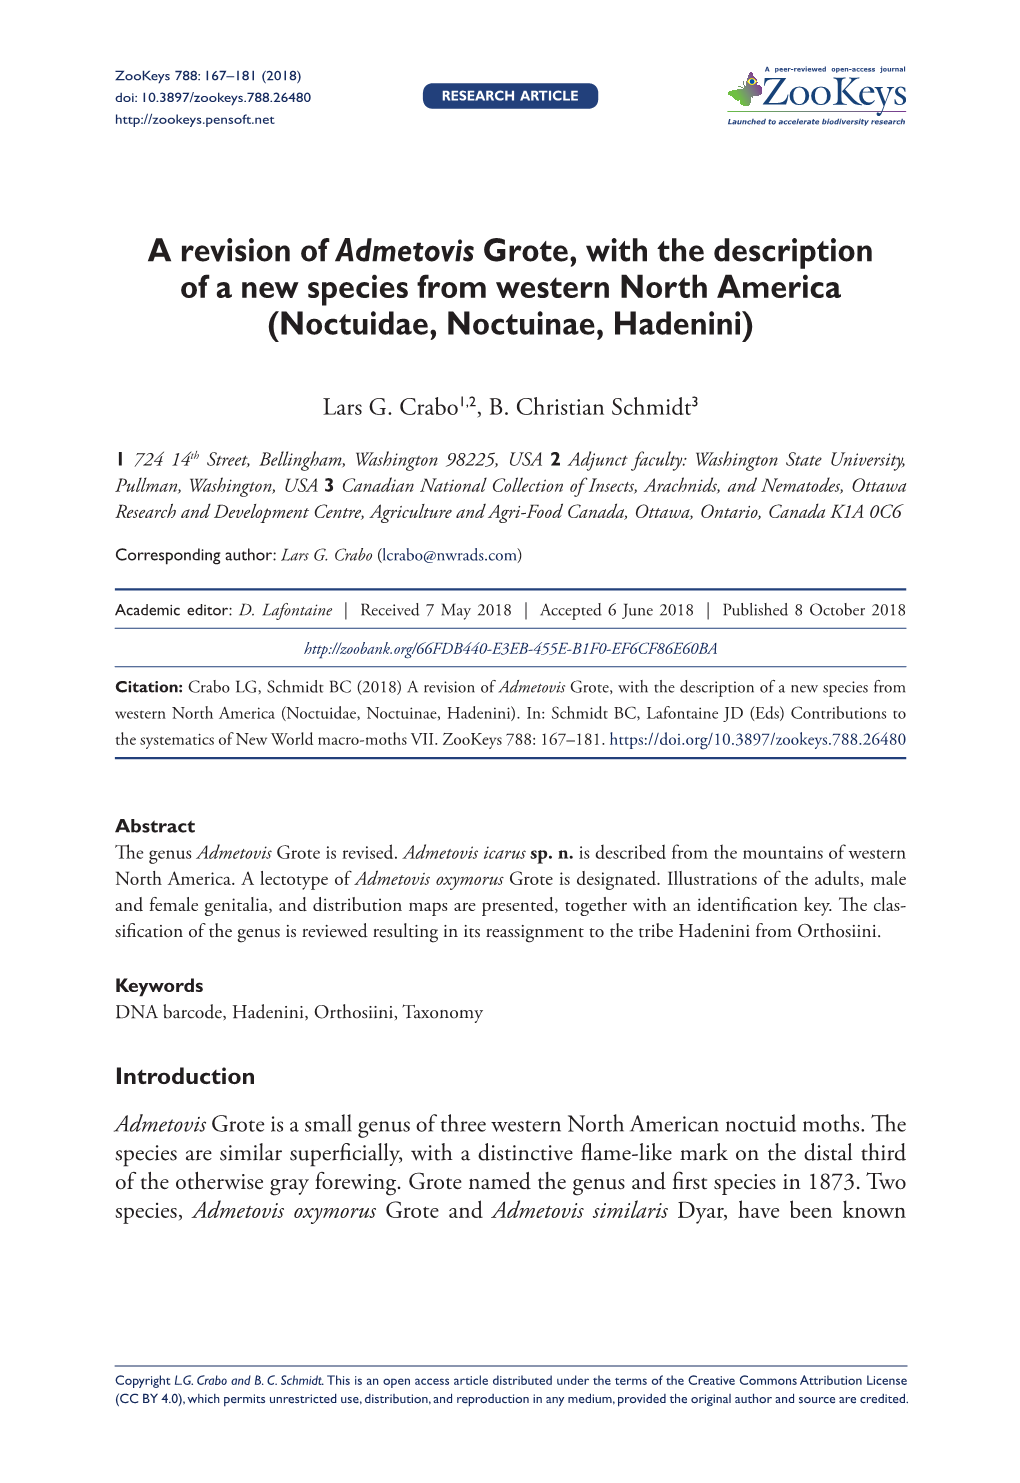 A Revision of Admetovis Grote, with the Description of a New Species from Western North America (Noctuidae, Noctuinae, Hadenini)